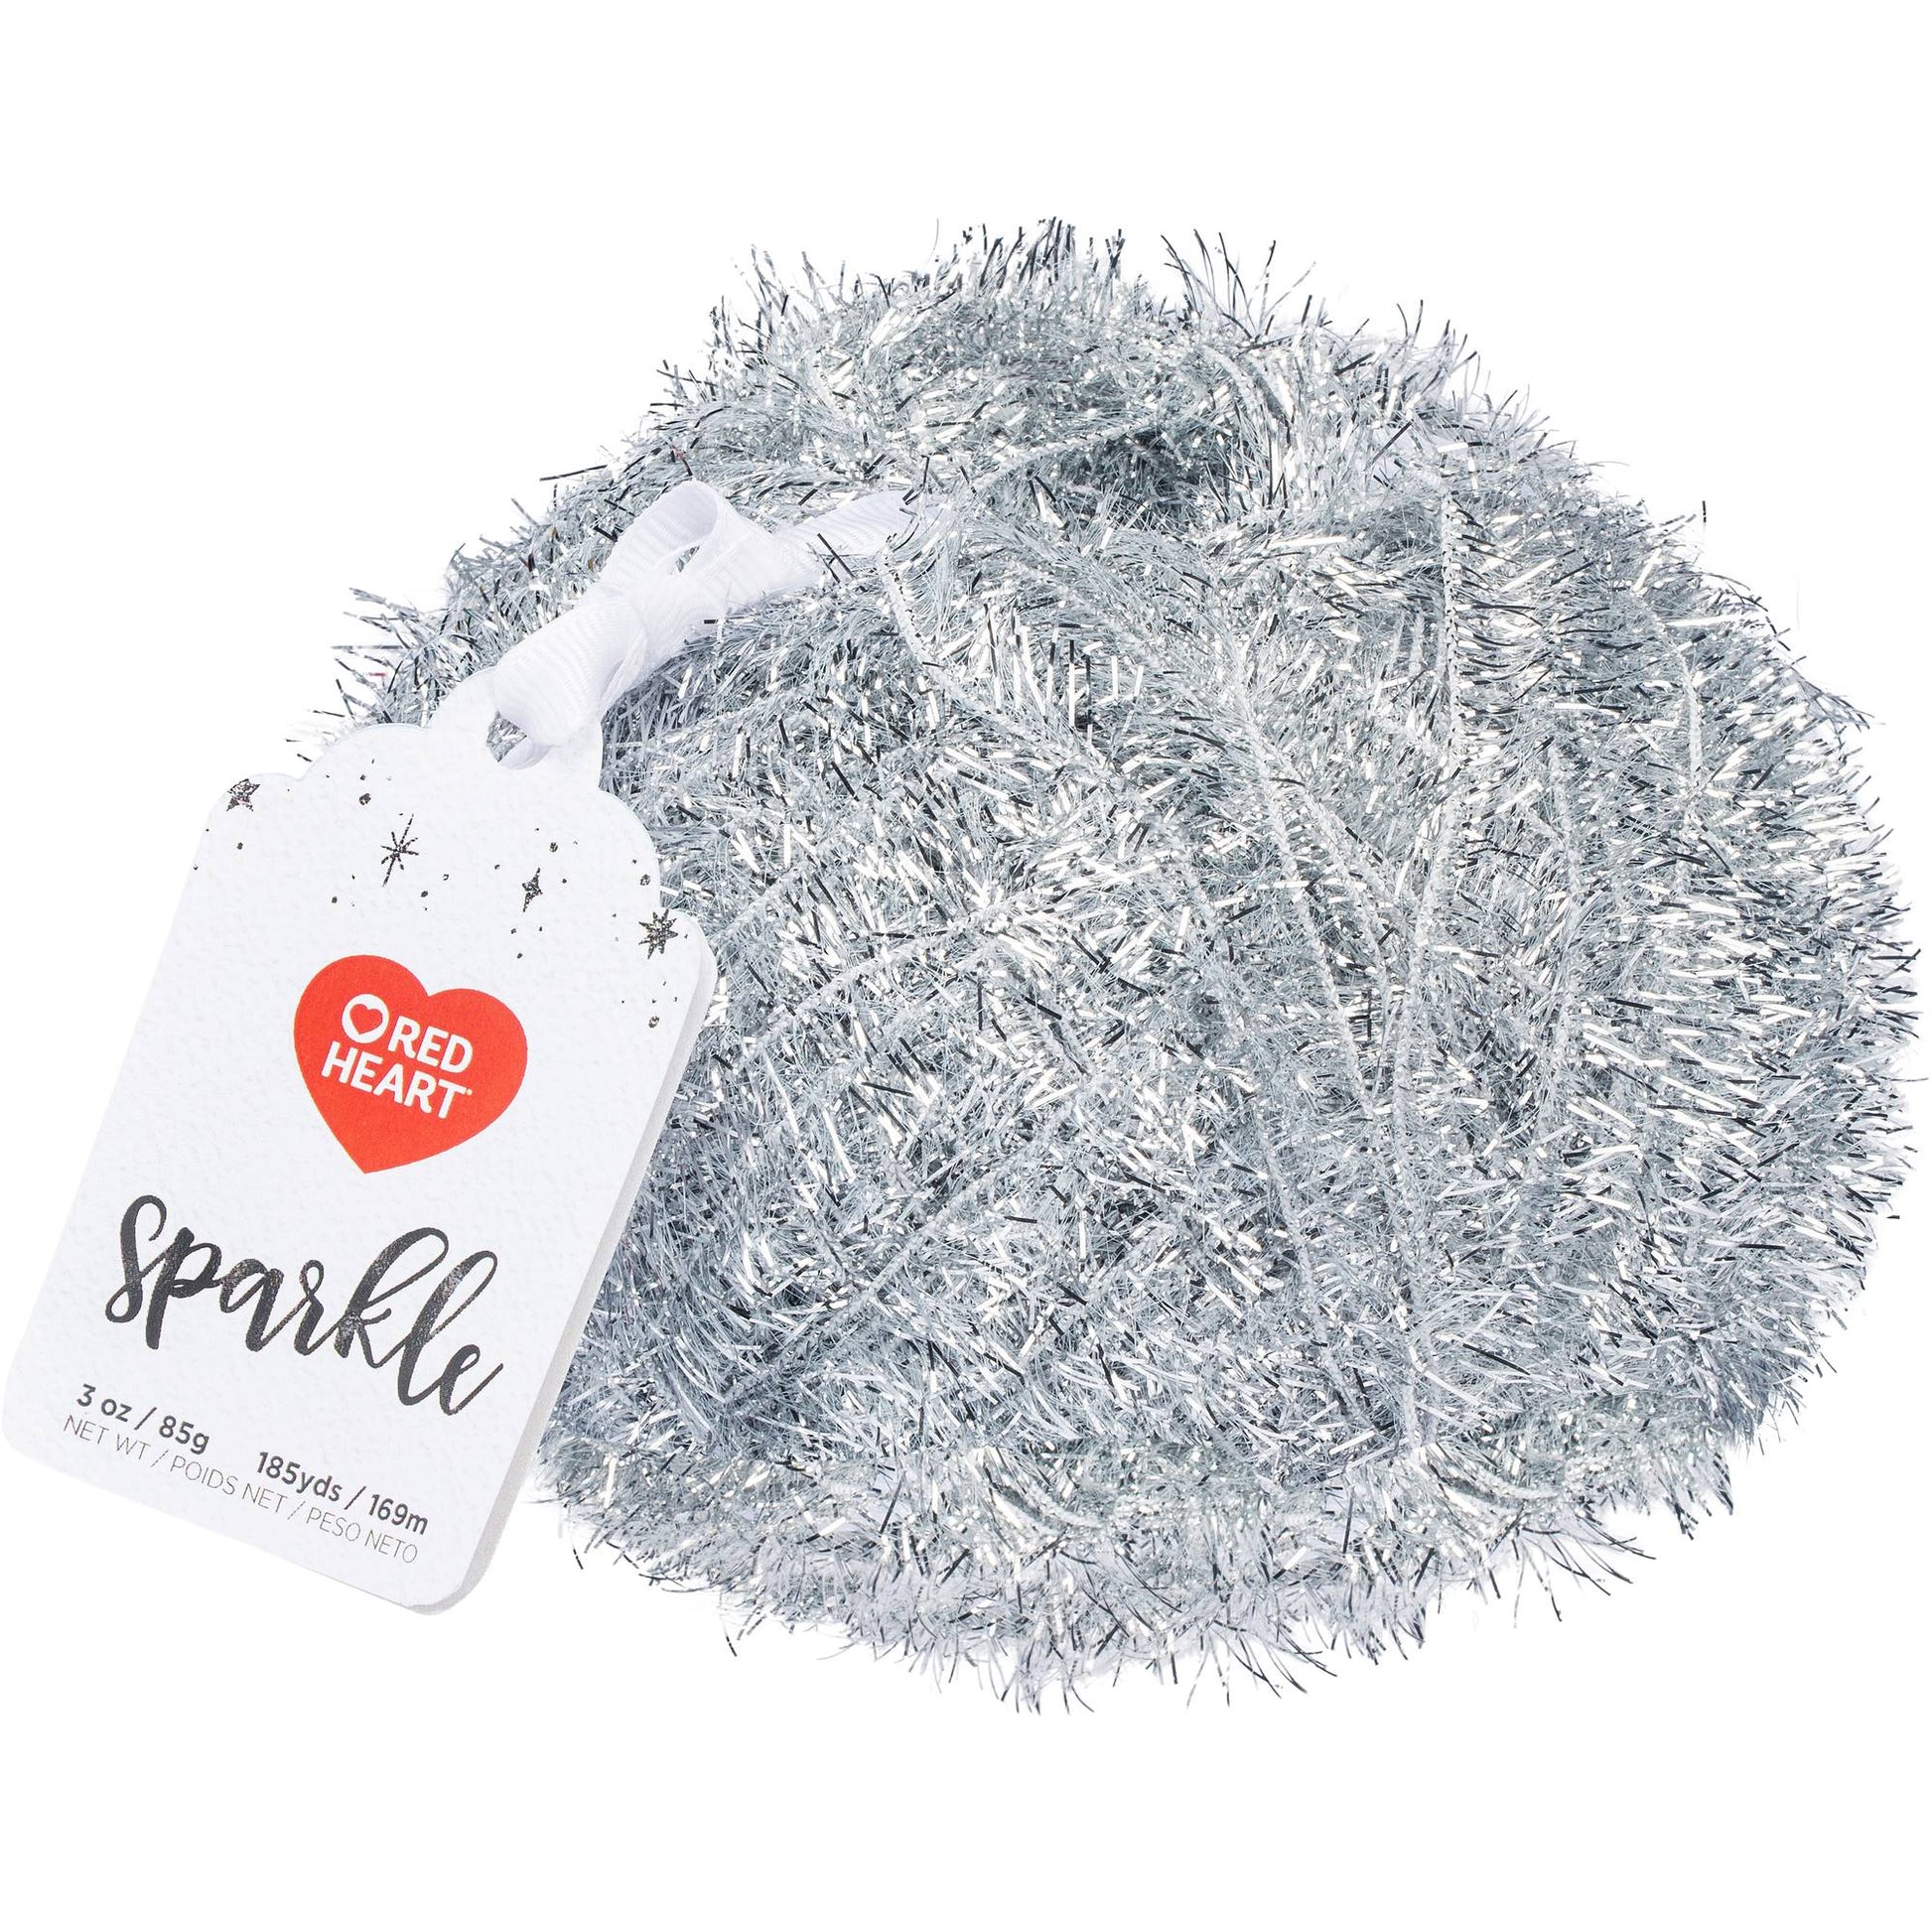 Red Heart Sparkle Yarn - Discontinued shades